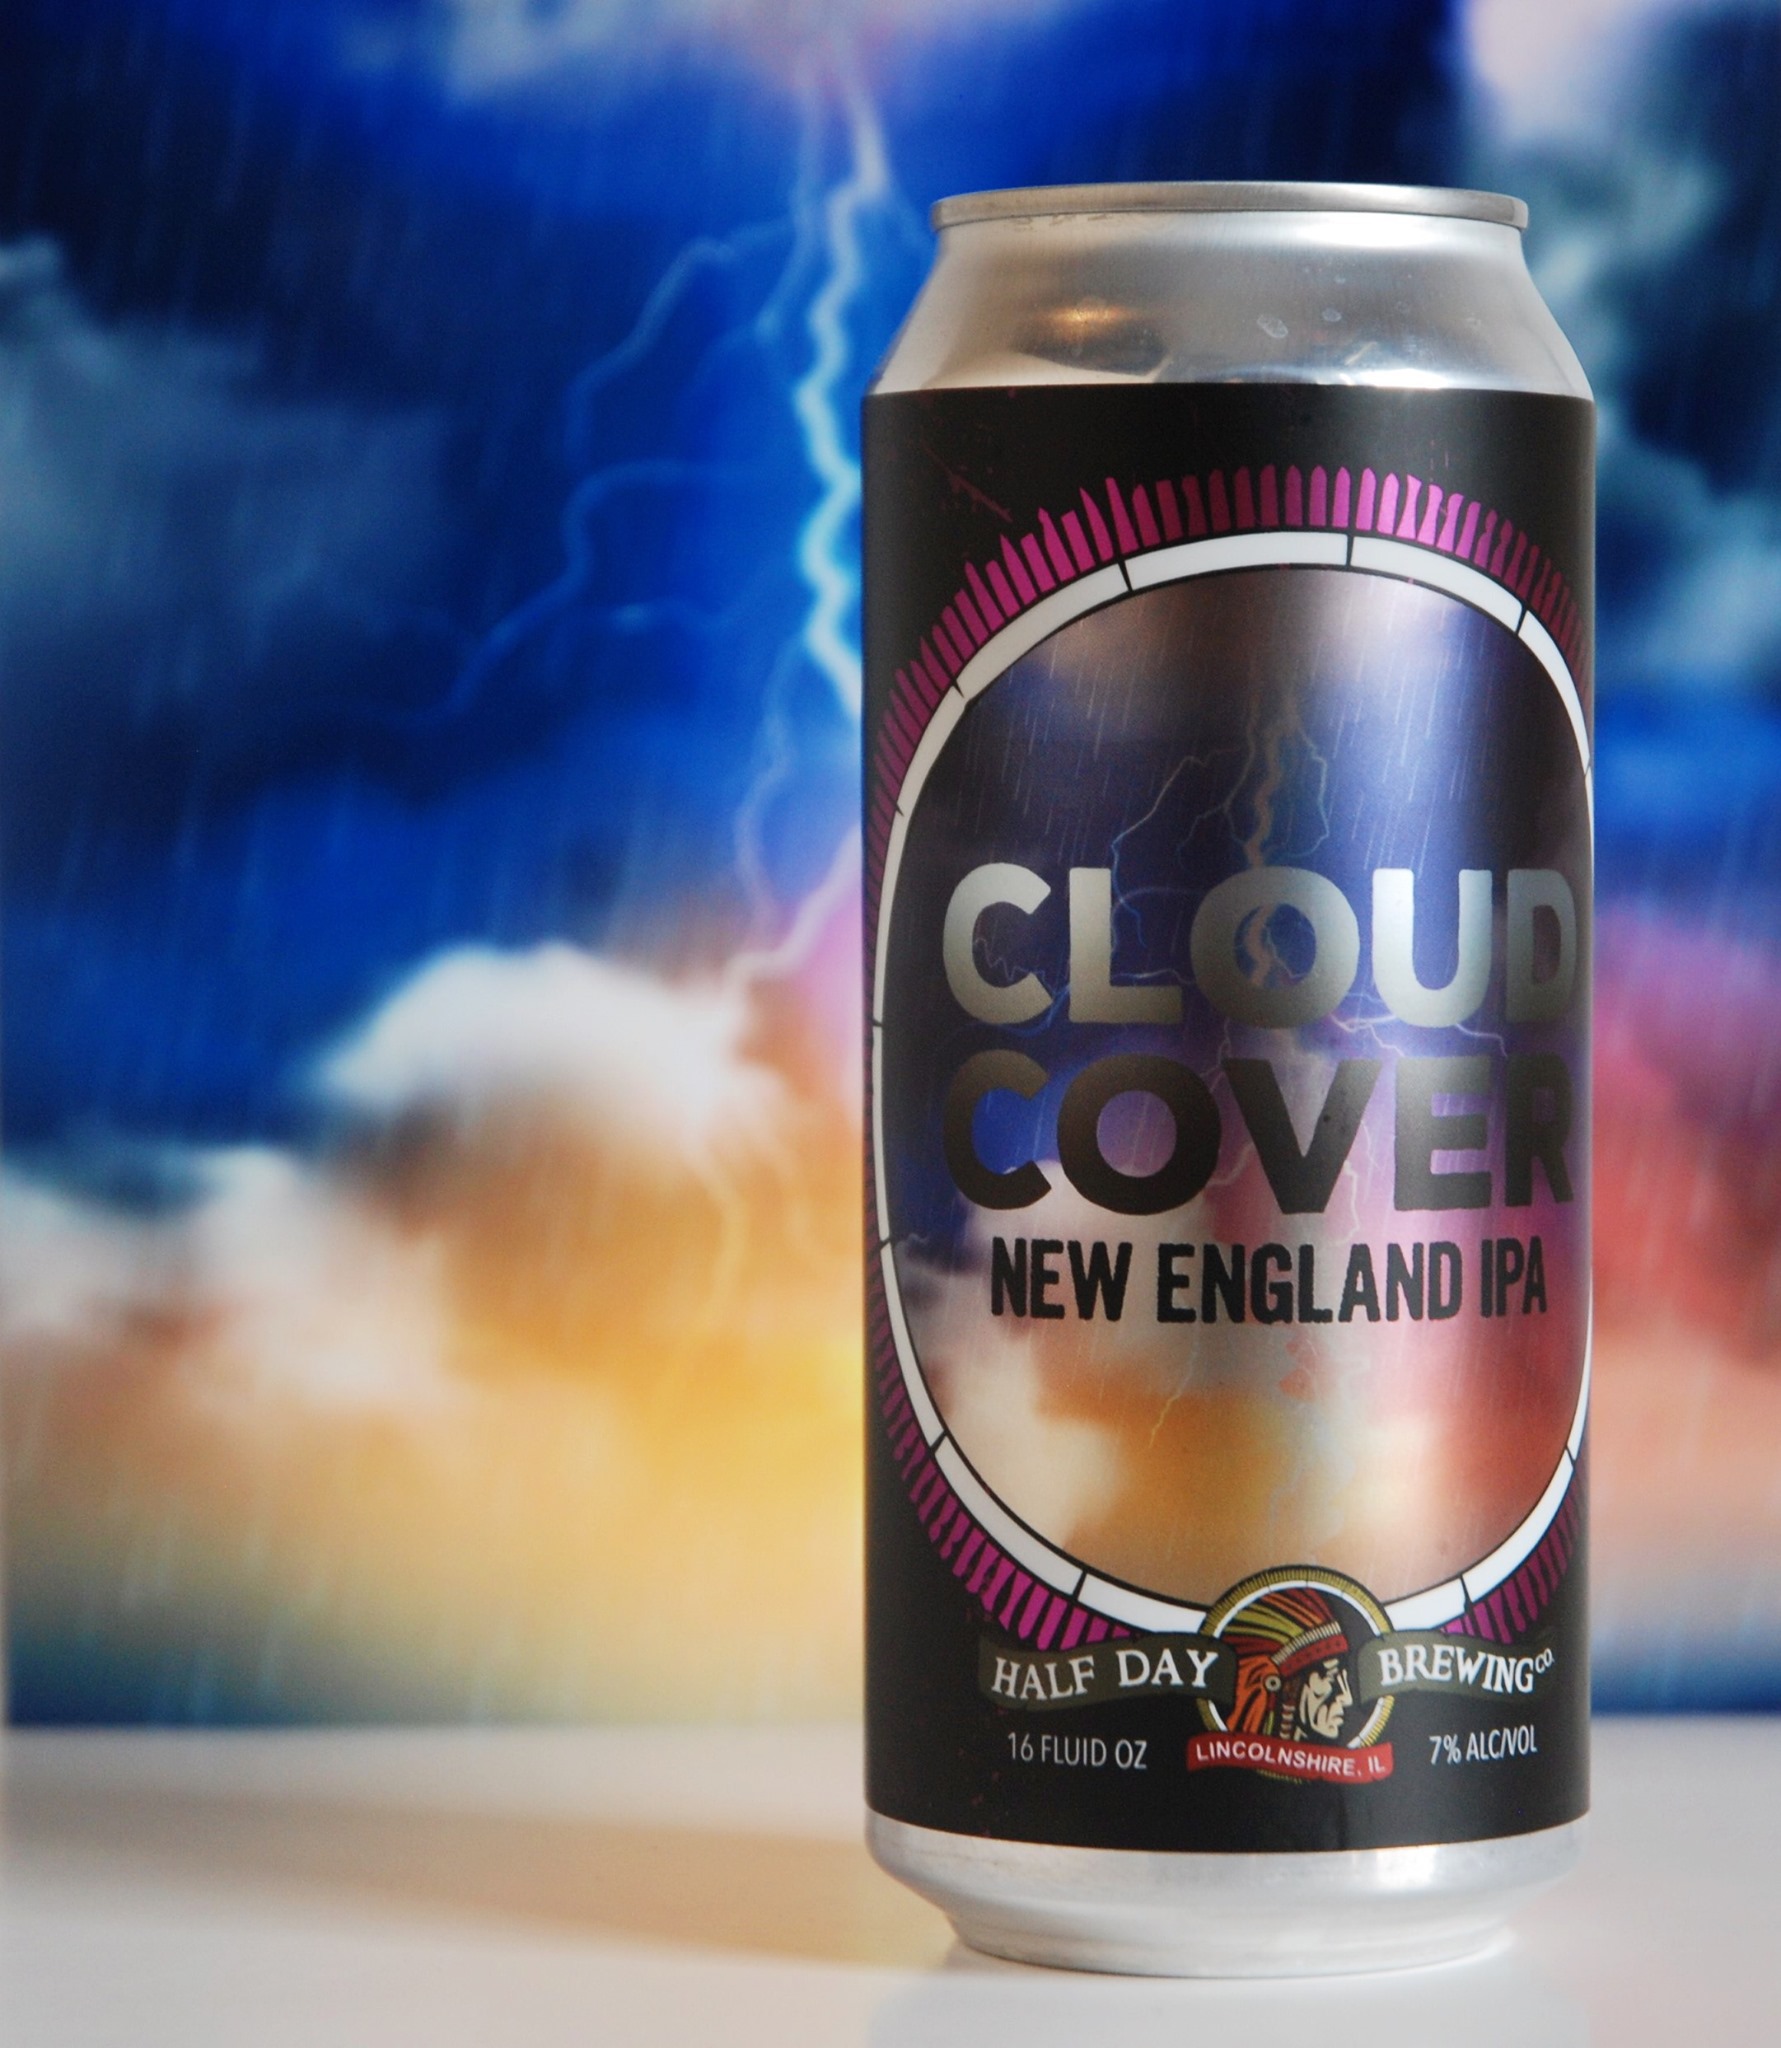 Cloud Cover by Half Day Brewing Co. in Lincolnshire